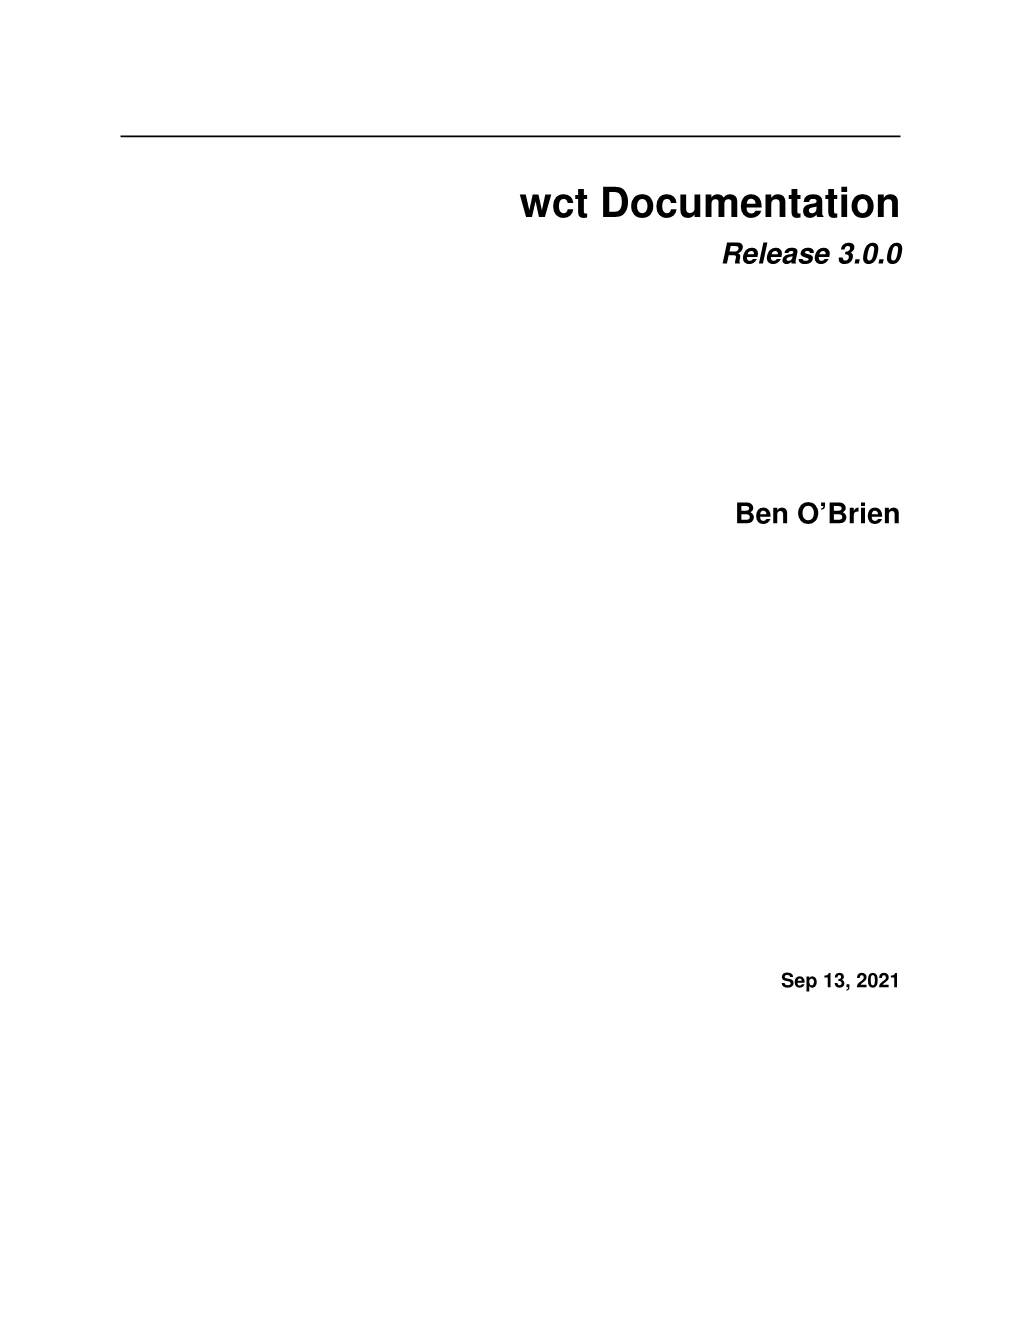 Wct Documentation Release 3.0.0